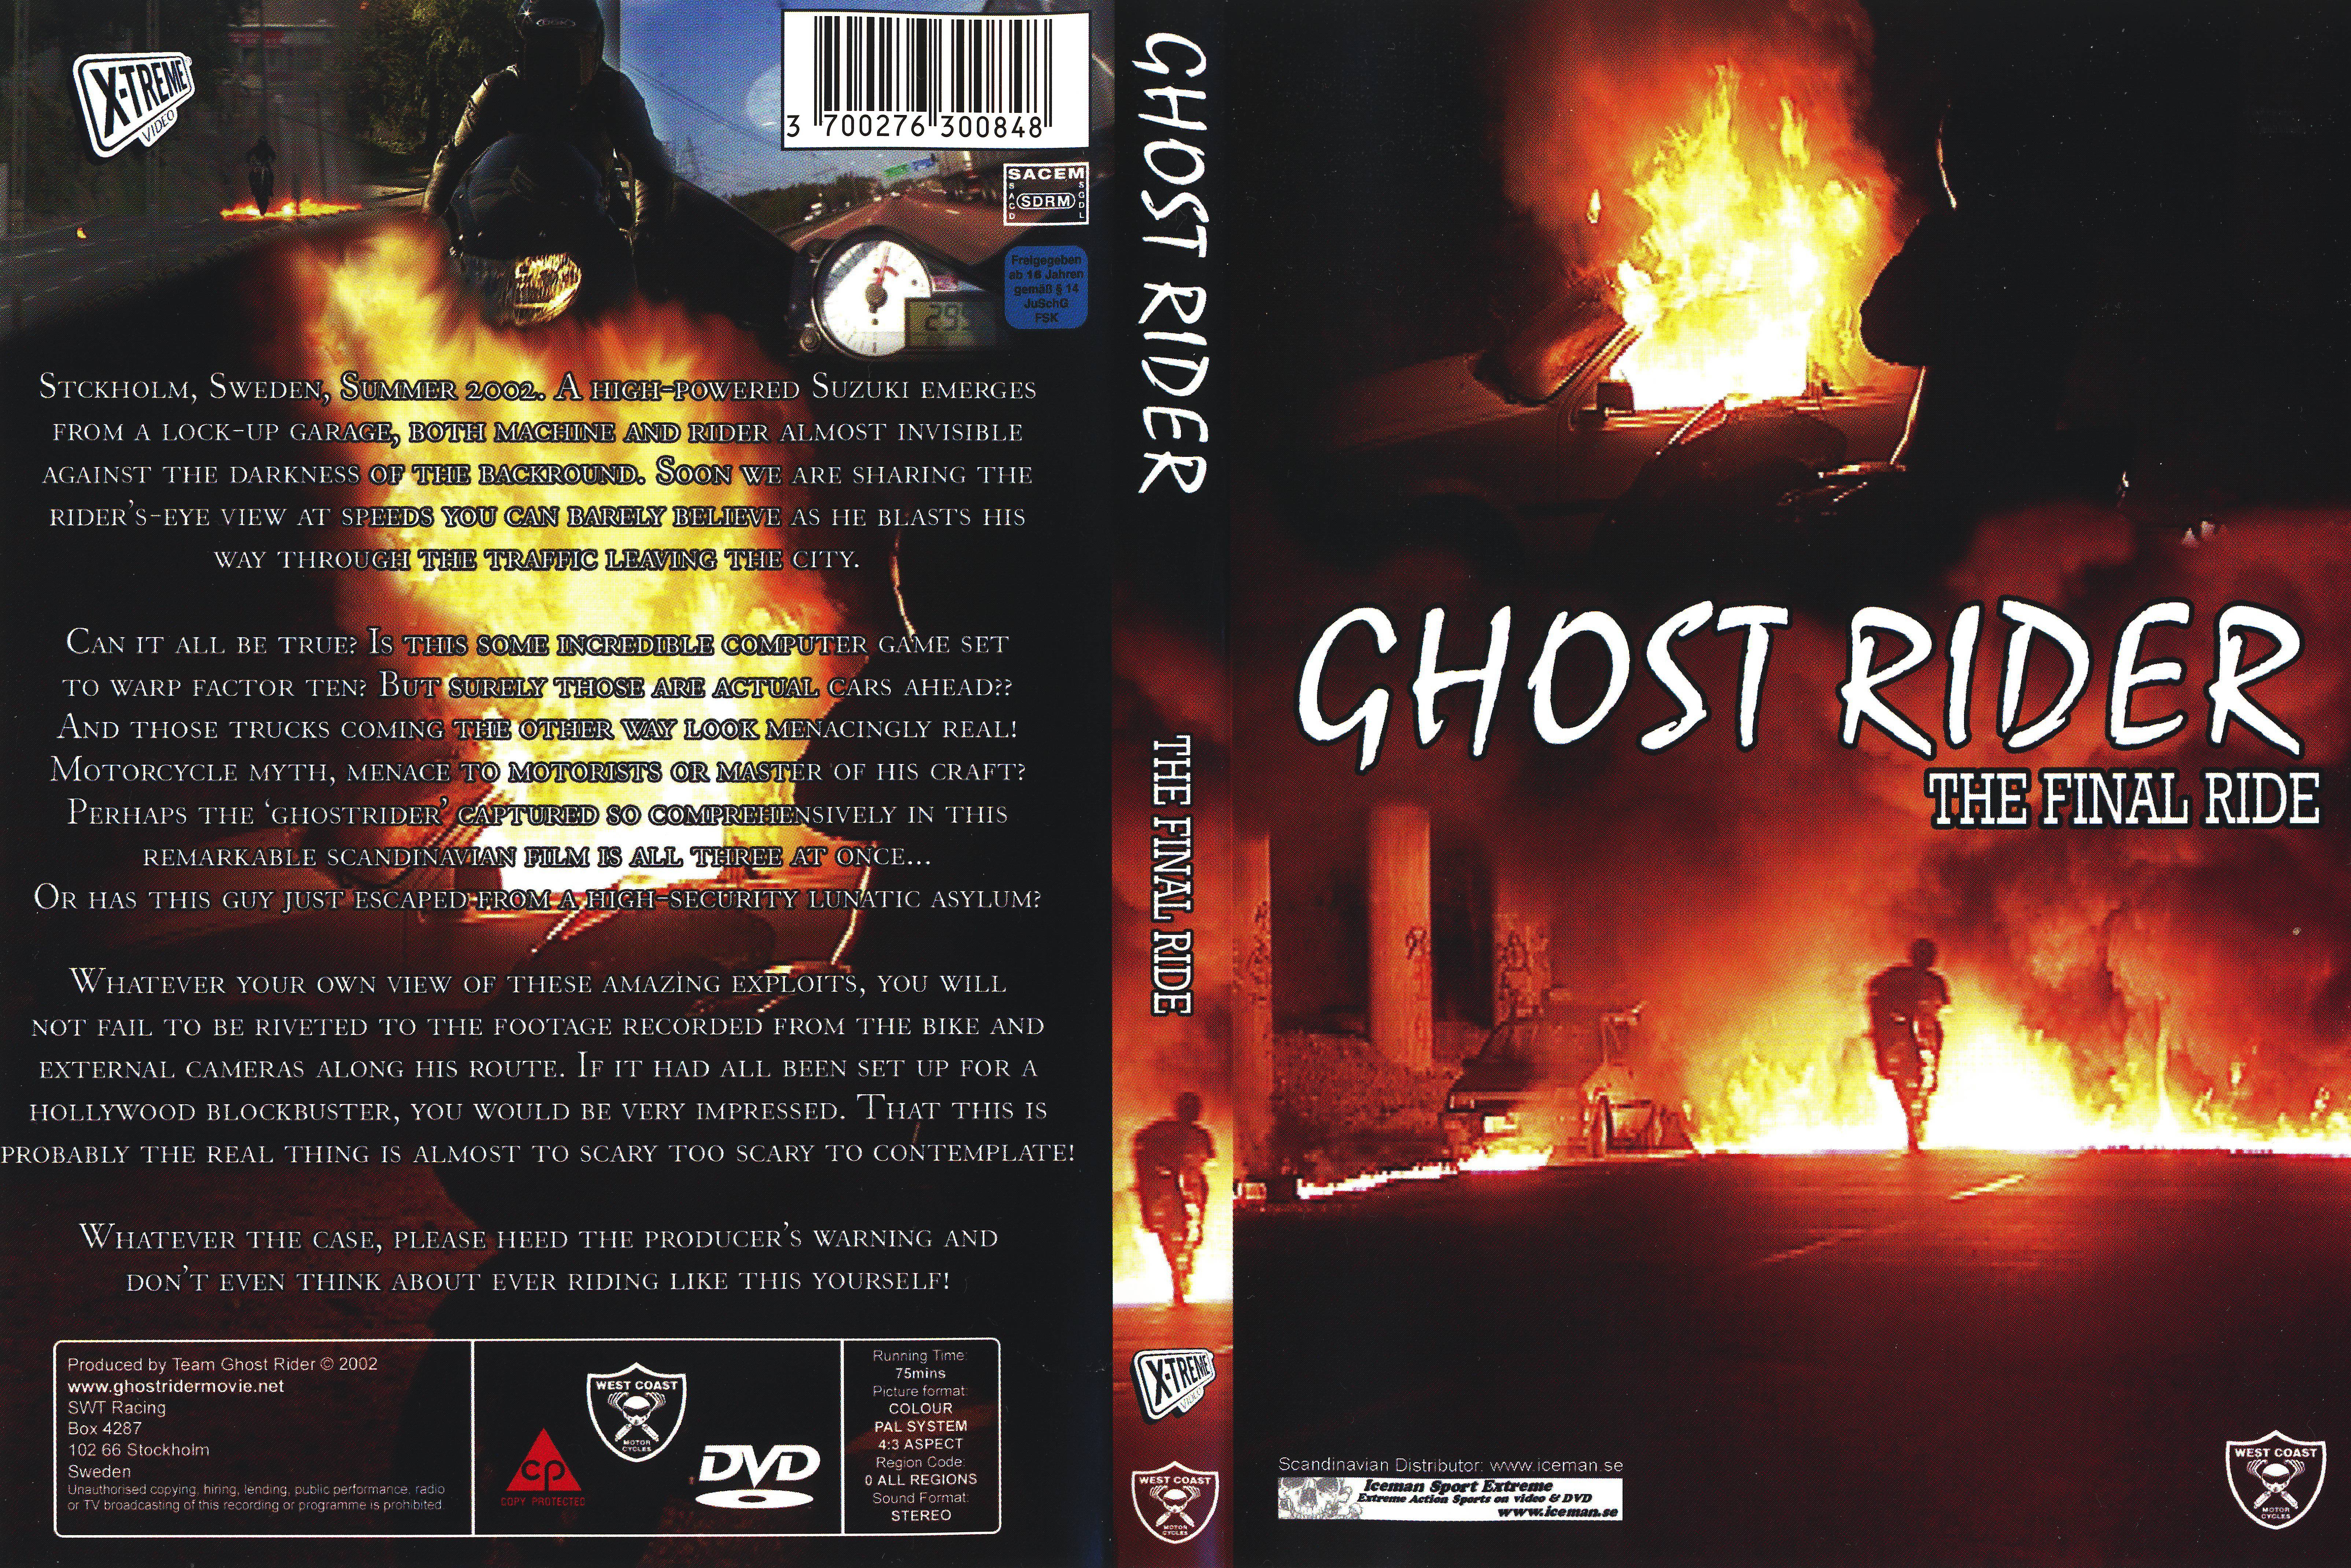 Jaquette DVD Ghost rider the final ride Zone 1